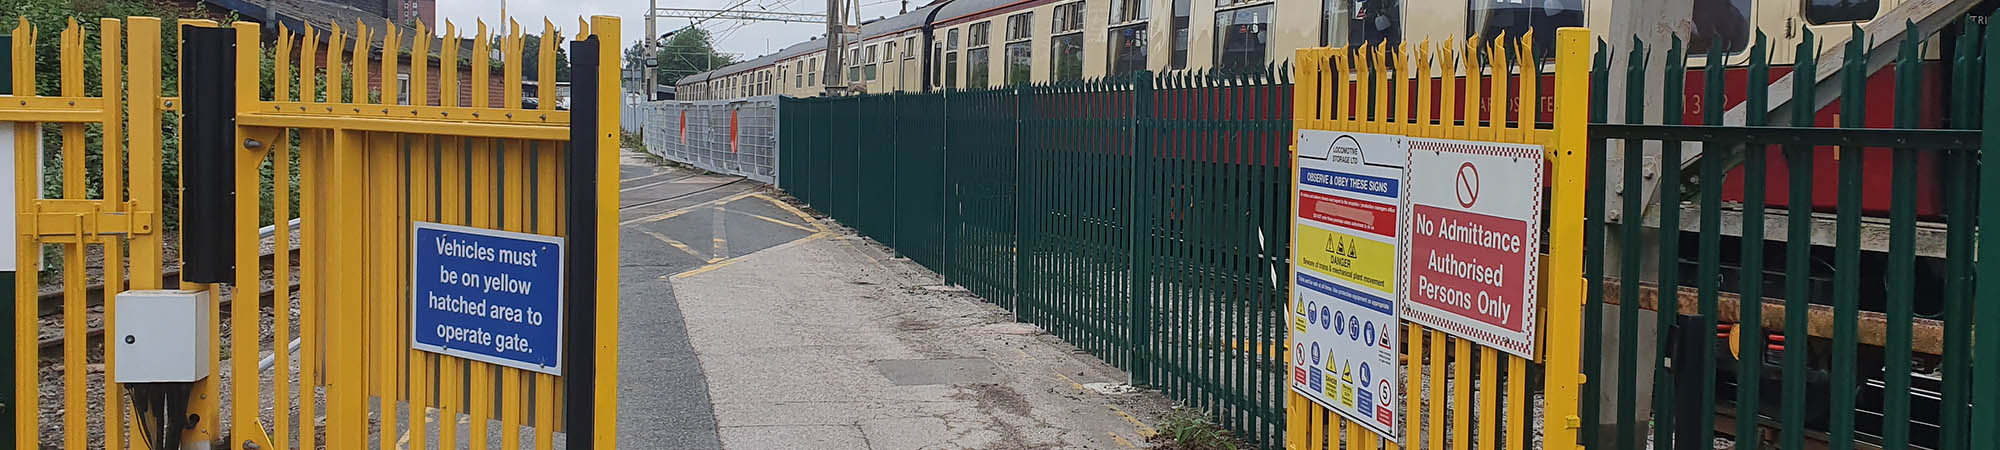 Security Fencing & Concreting Services